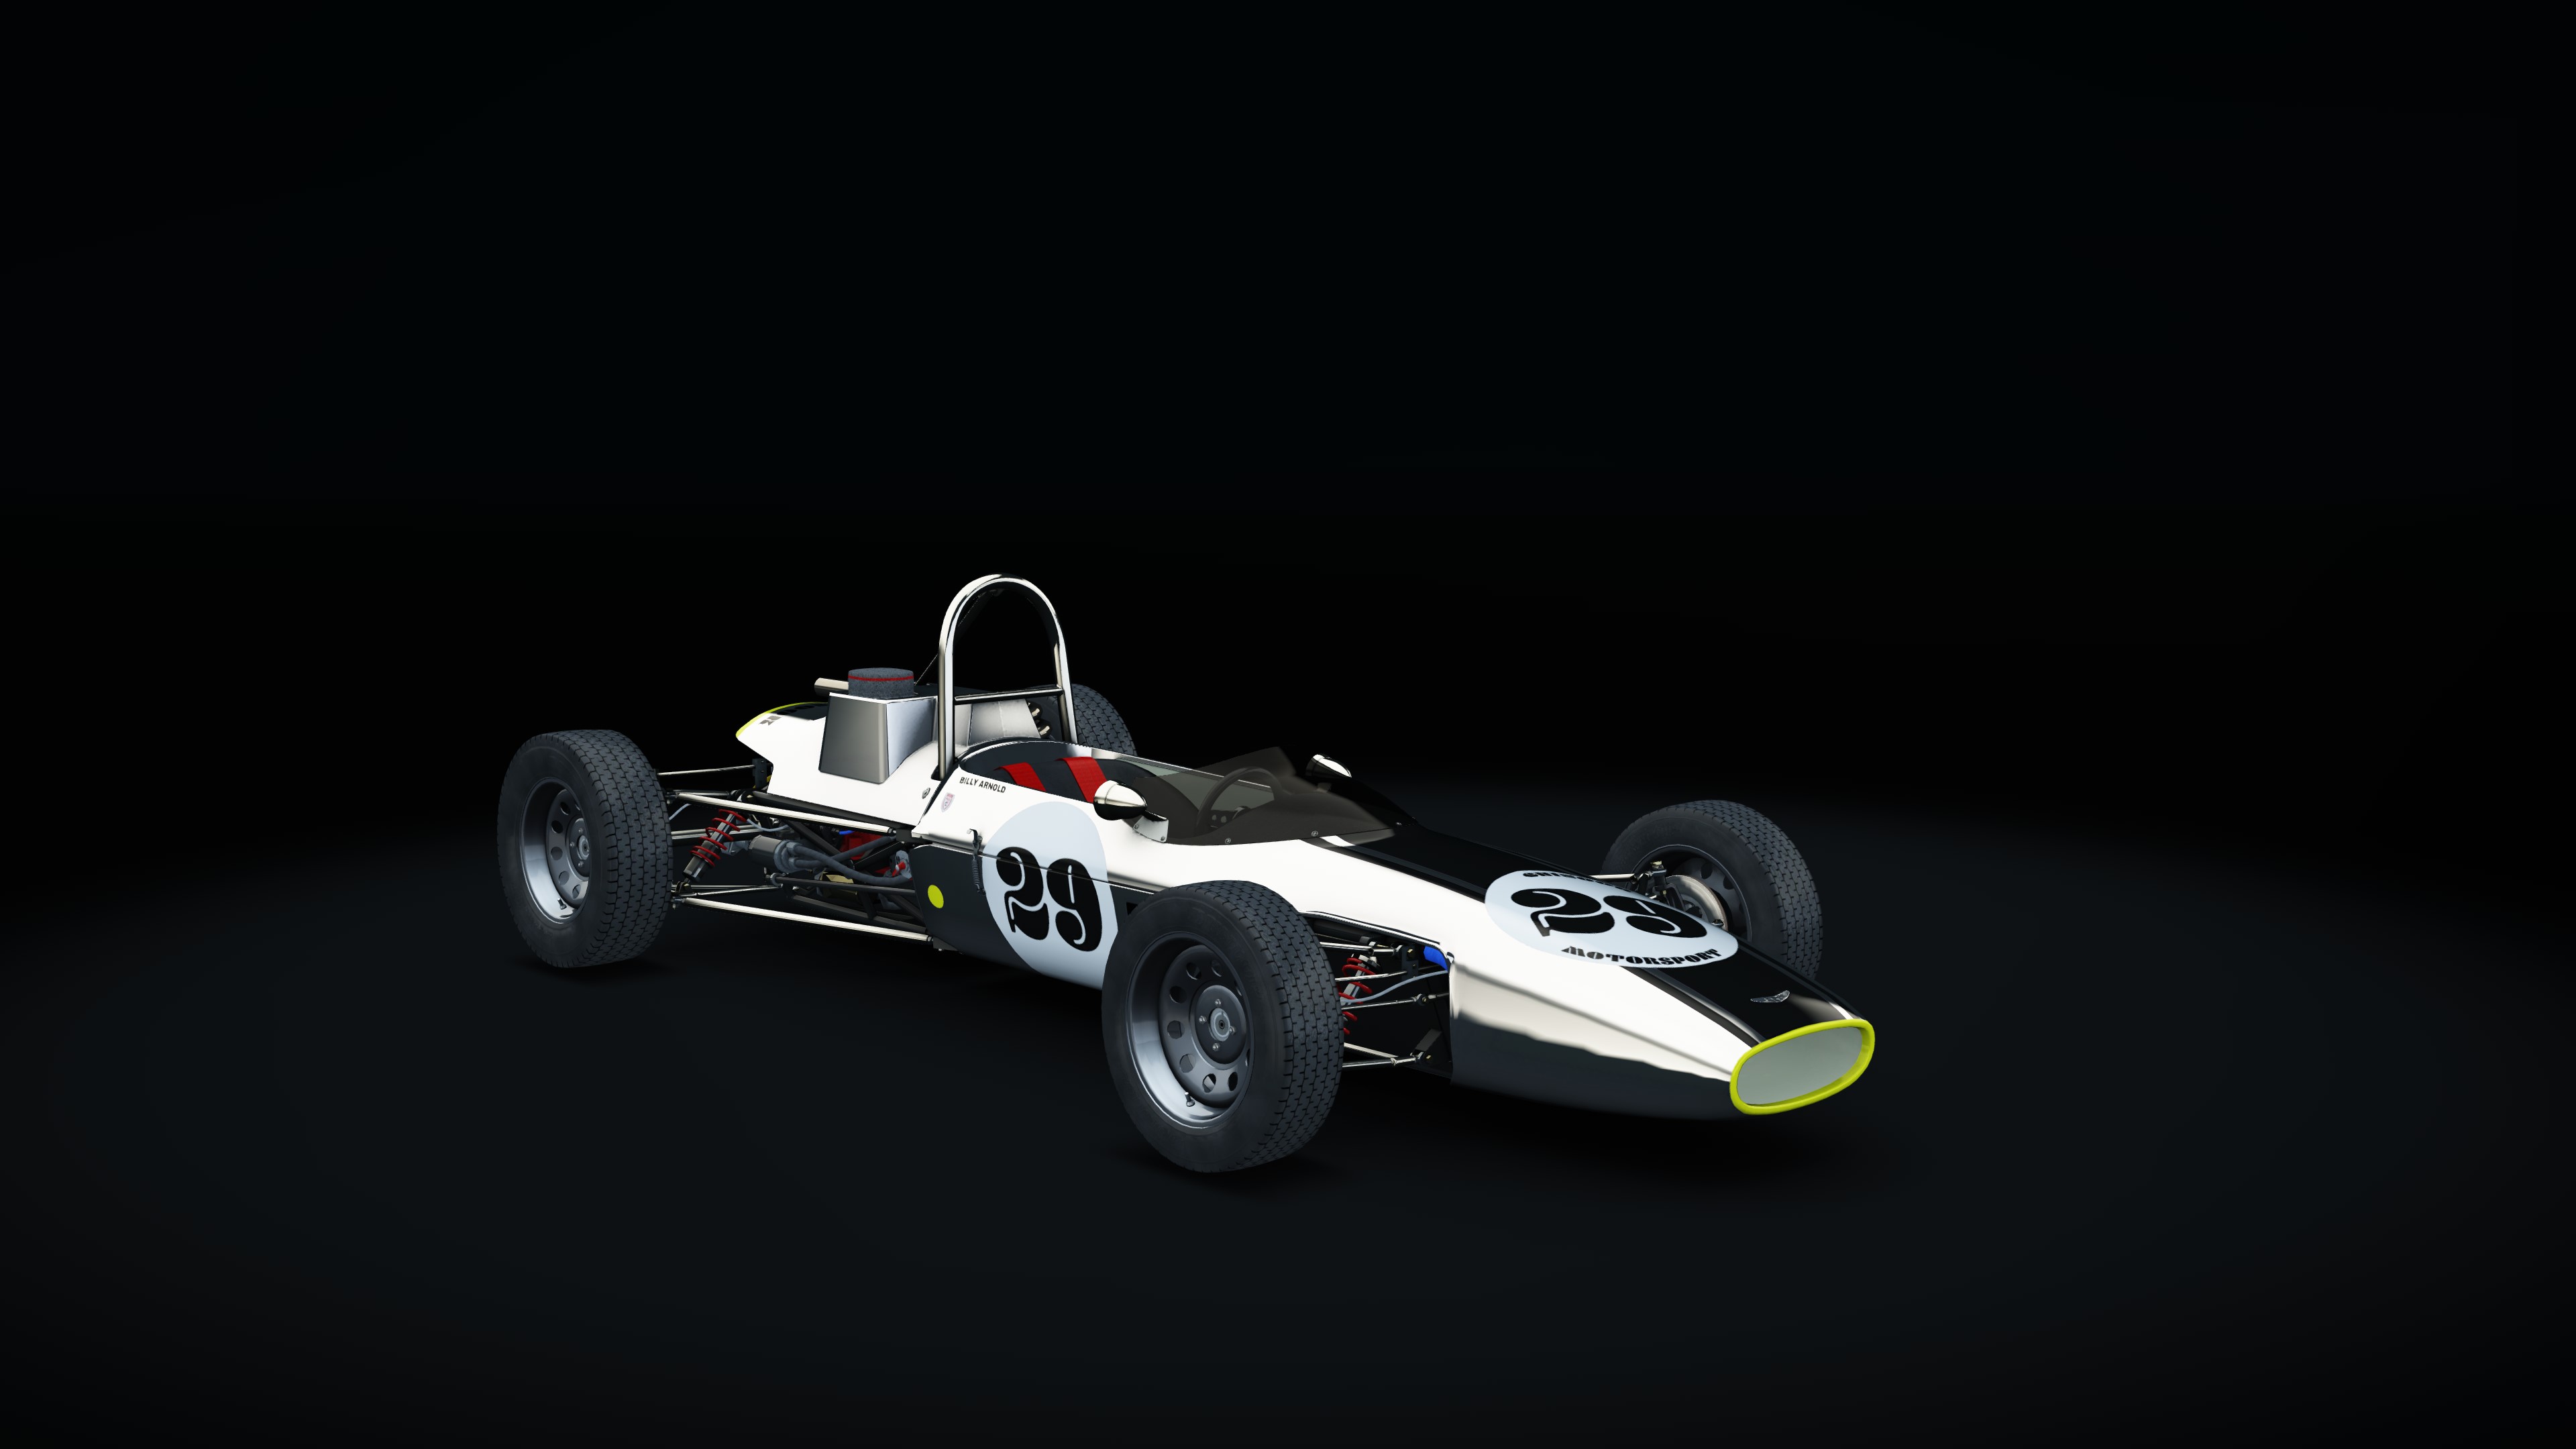 Russell-Alexis Mk. 14 Formula Ford, skin 29BArnold